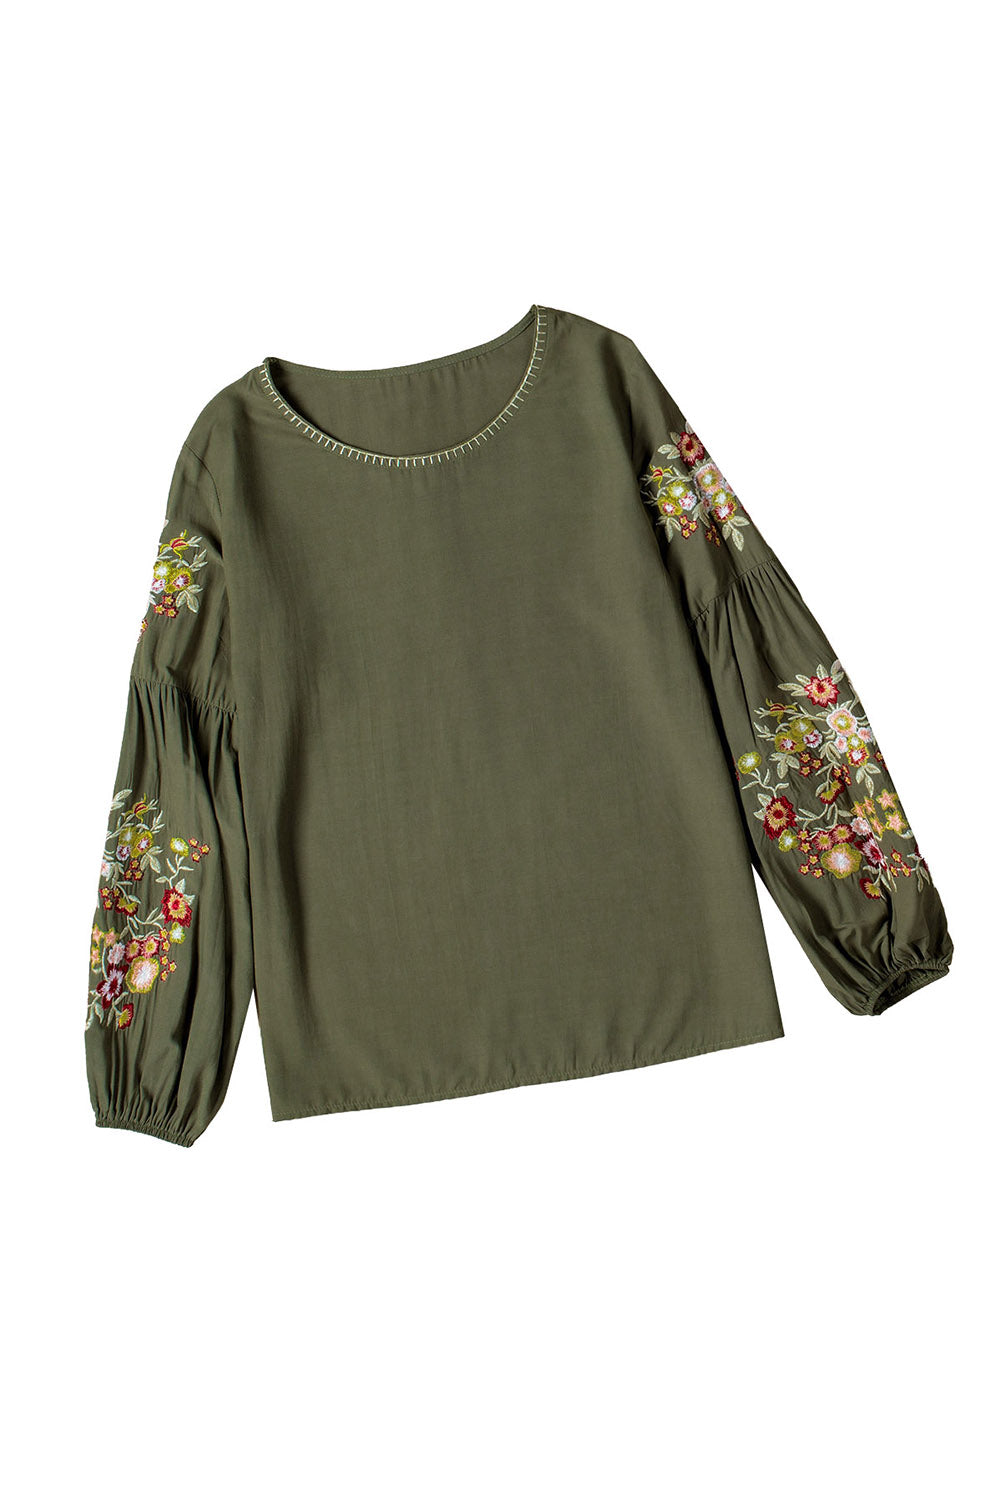 Floral Embroidery Long Sleeve Top Angelwarriorfitness.com